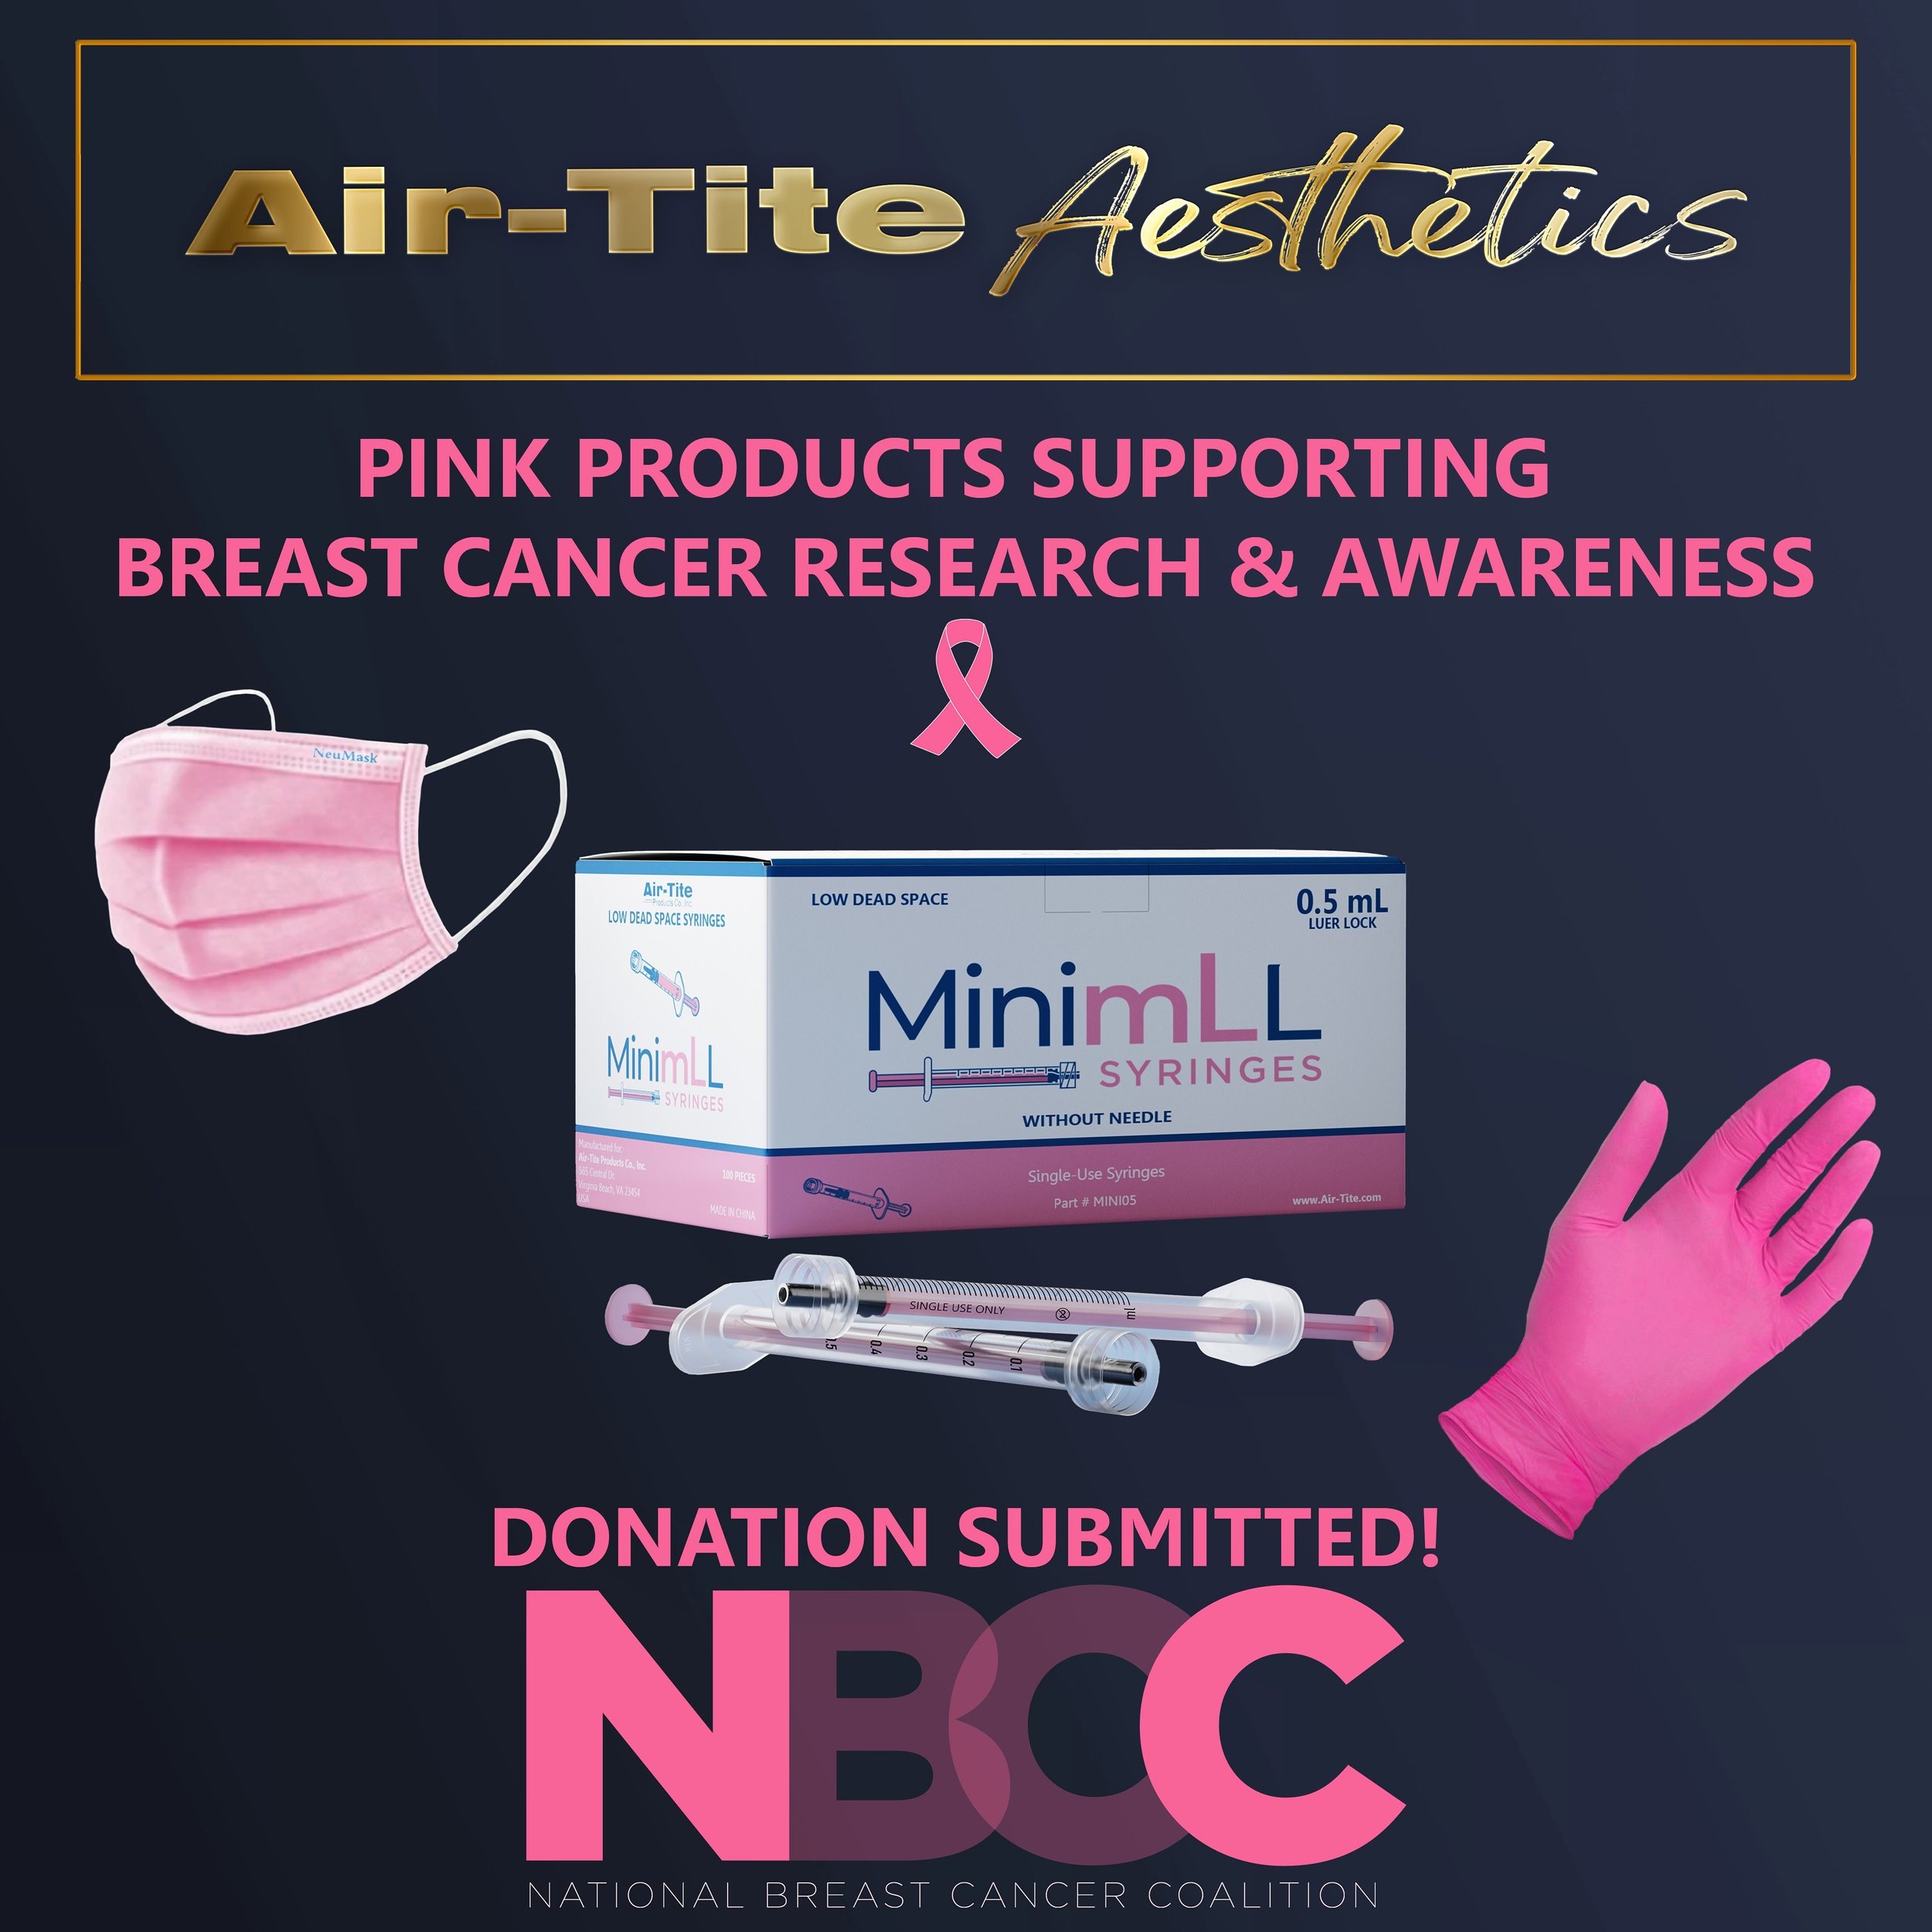 Air-Tite is happy to announce that our breast cancer donation amounts are continuously growing, and we recently were able to make our largest breast cancer donation yet thanks to you all! A portion of every purchase of one of our pink products (Minim